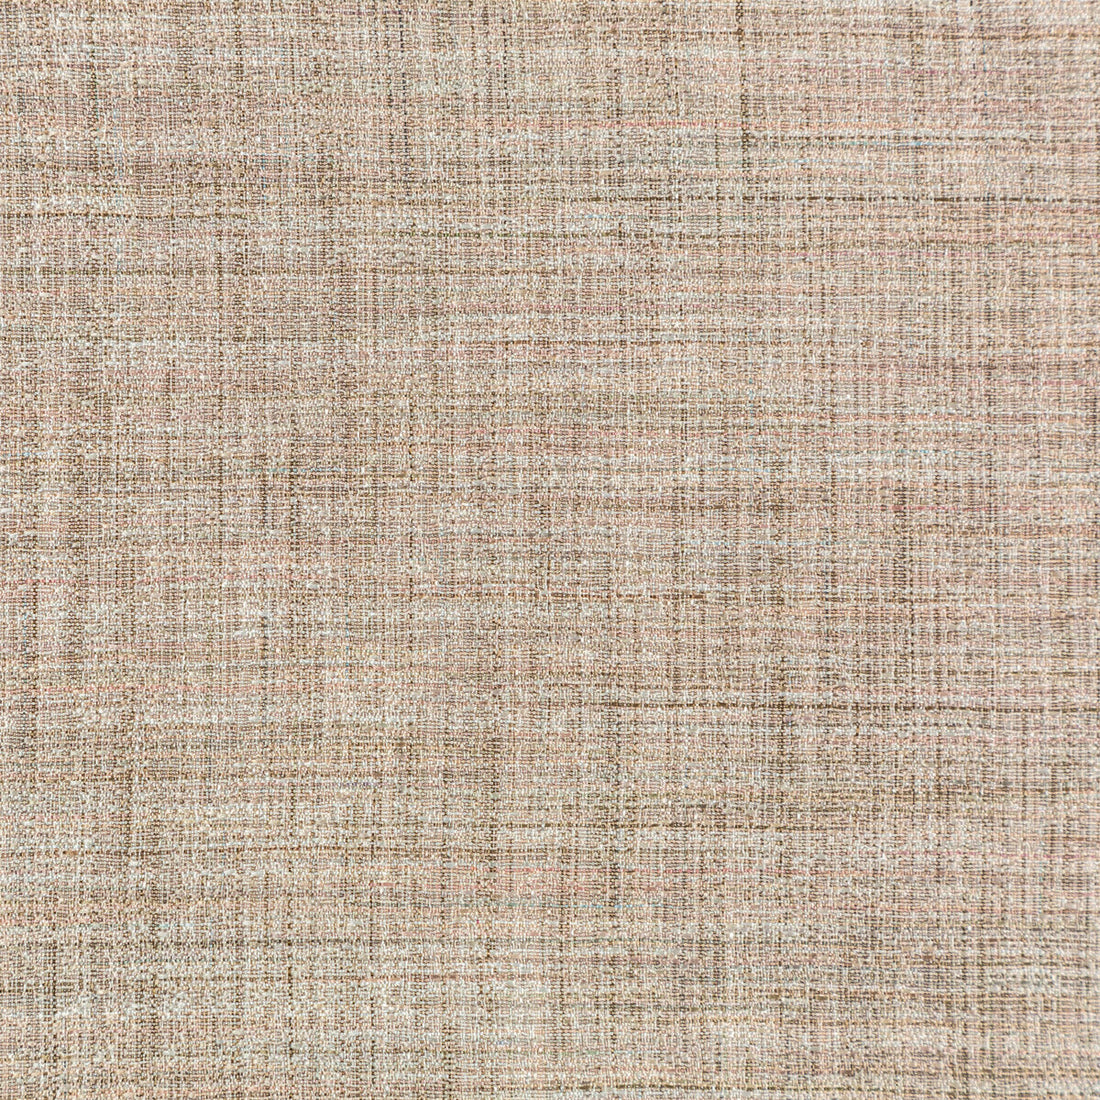 Clive fabric in abalone color - pattern 4650.1611.0 - by Kravet Contract